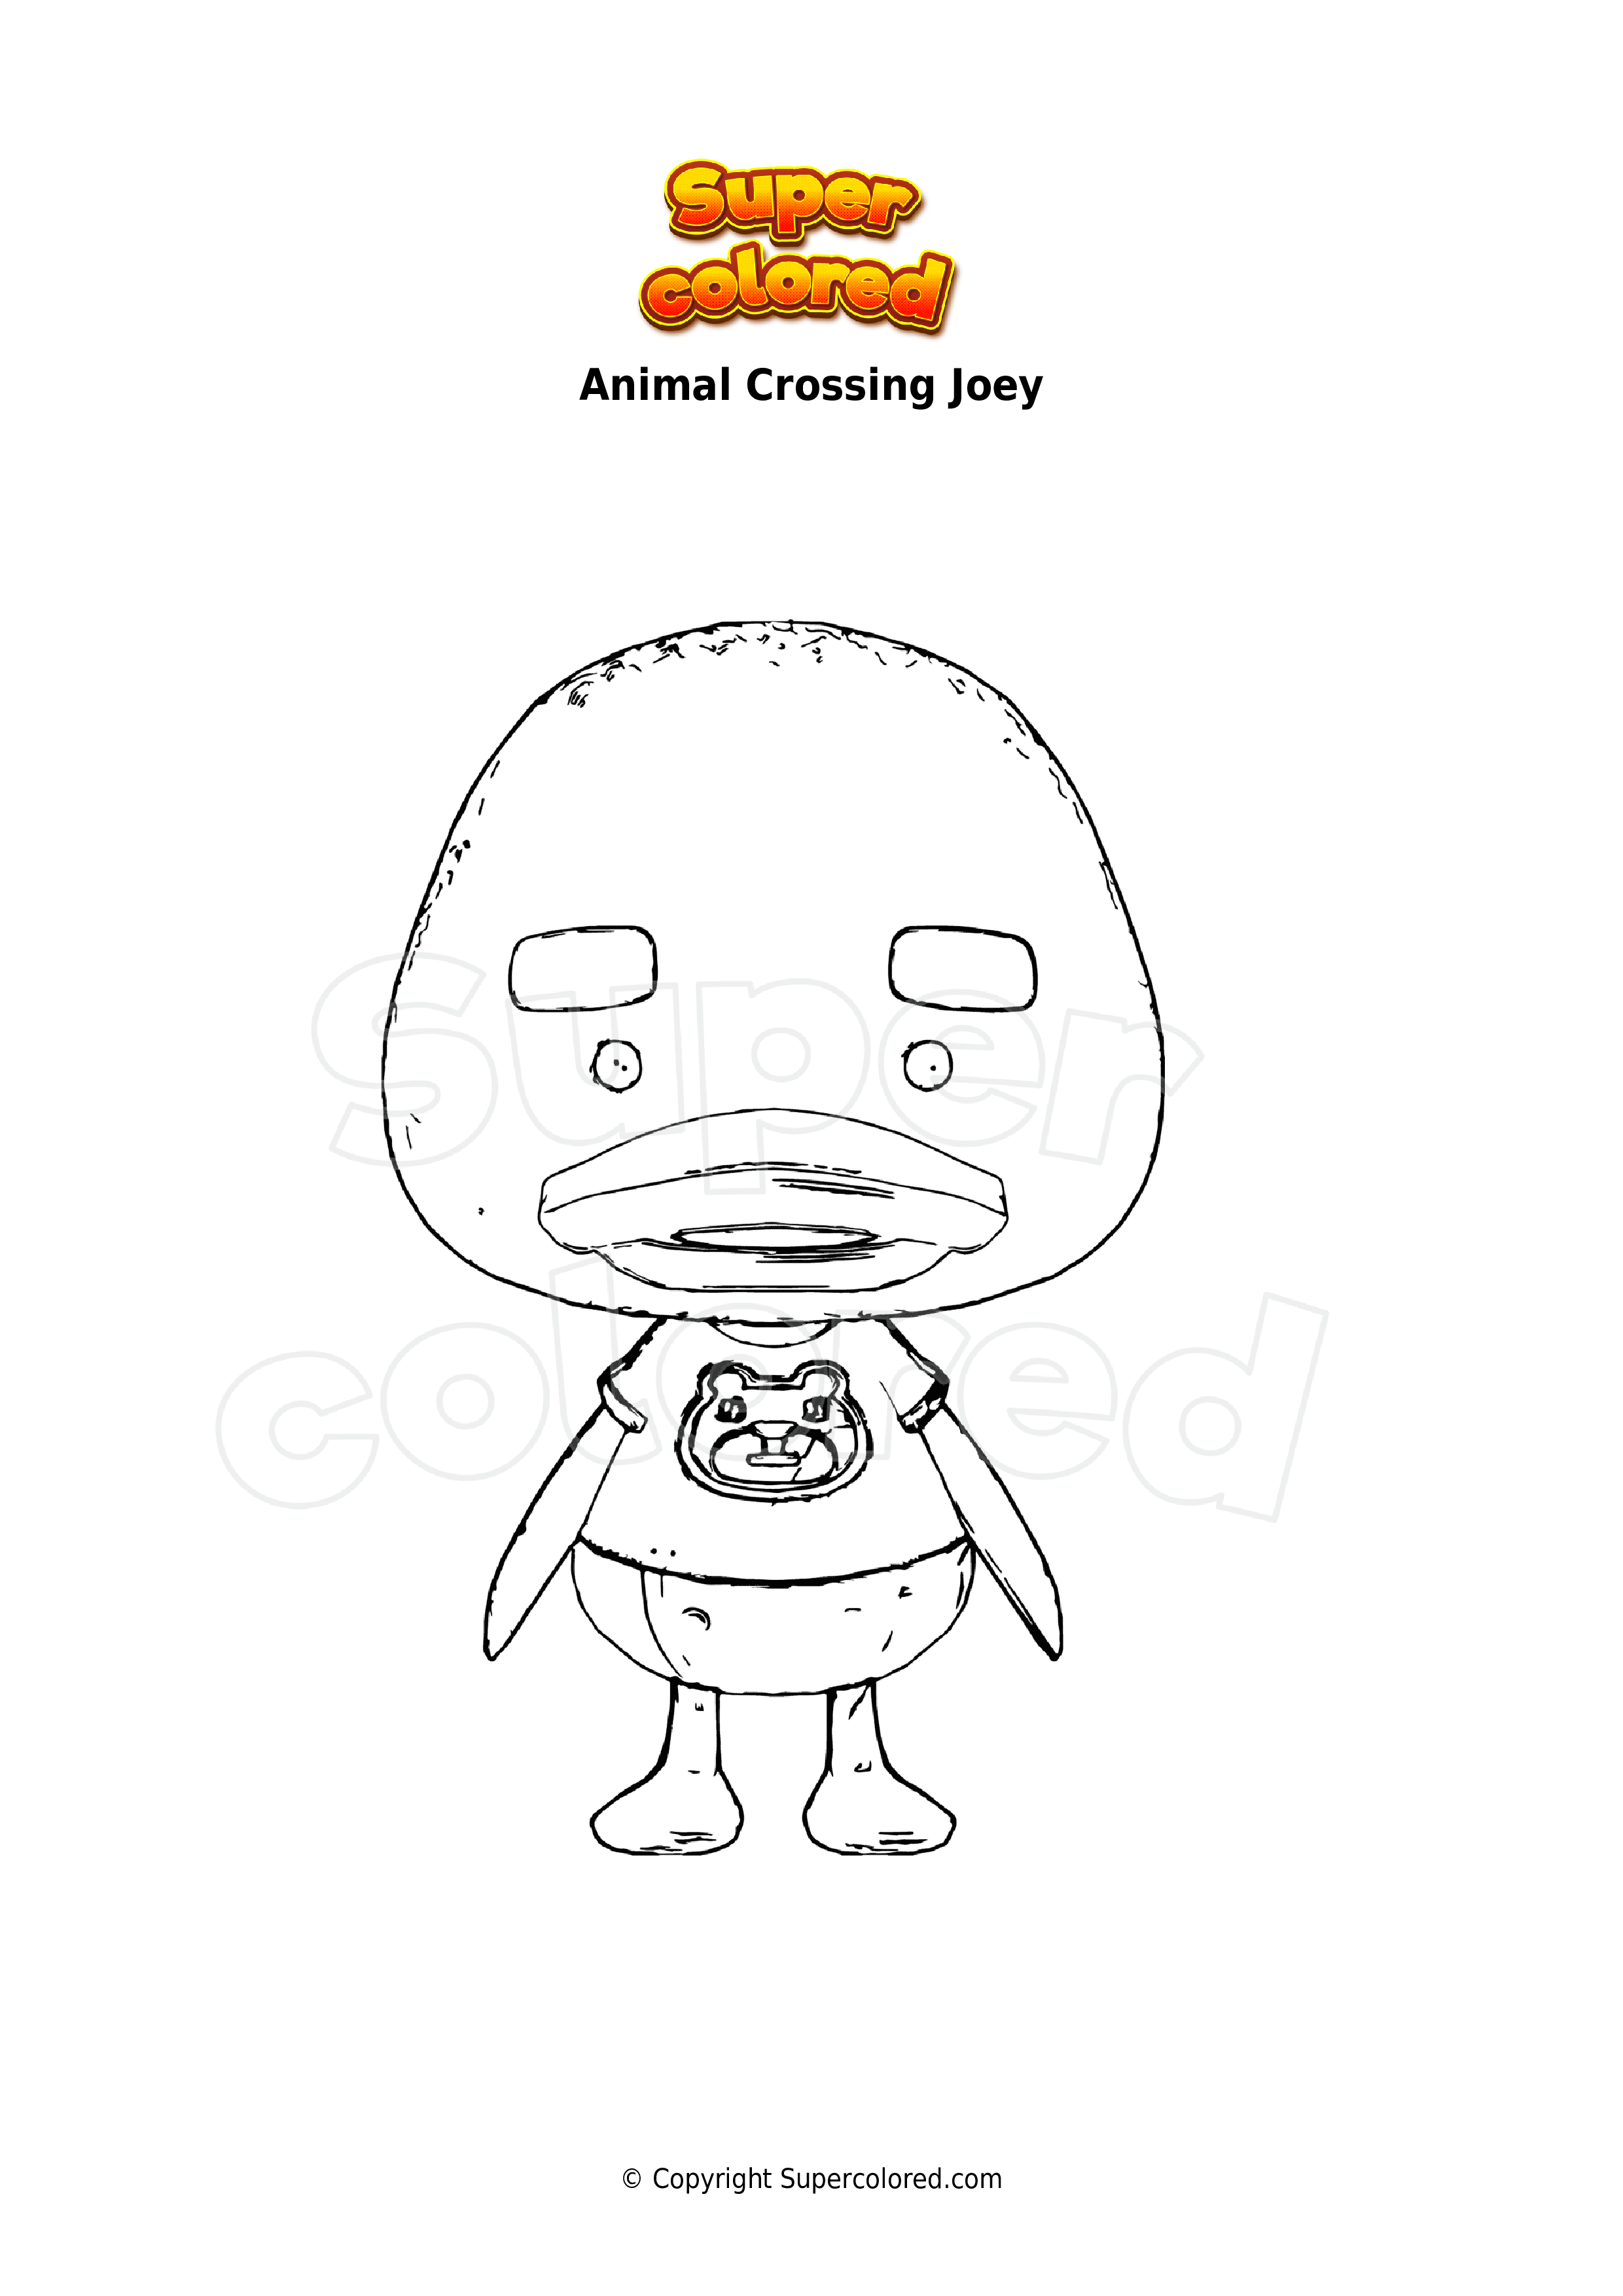 Coloring page Animal Crossing Joey 